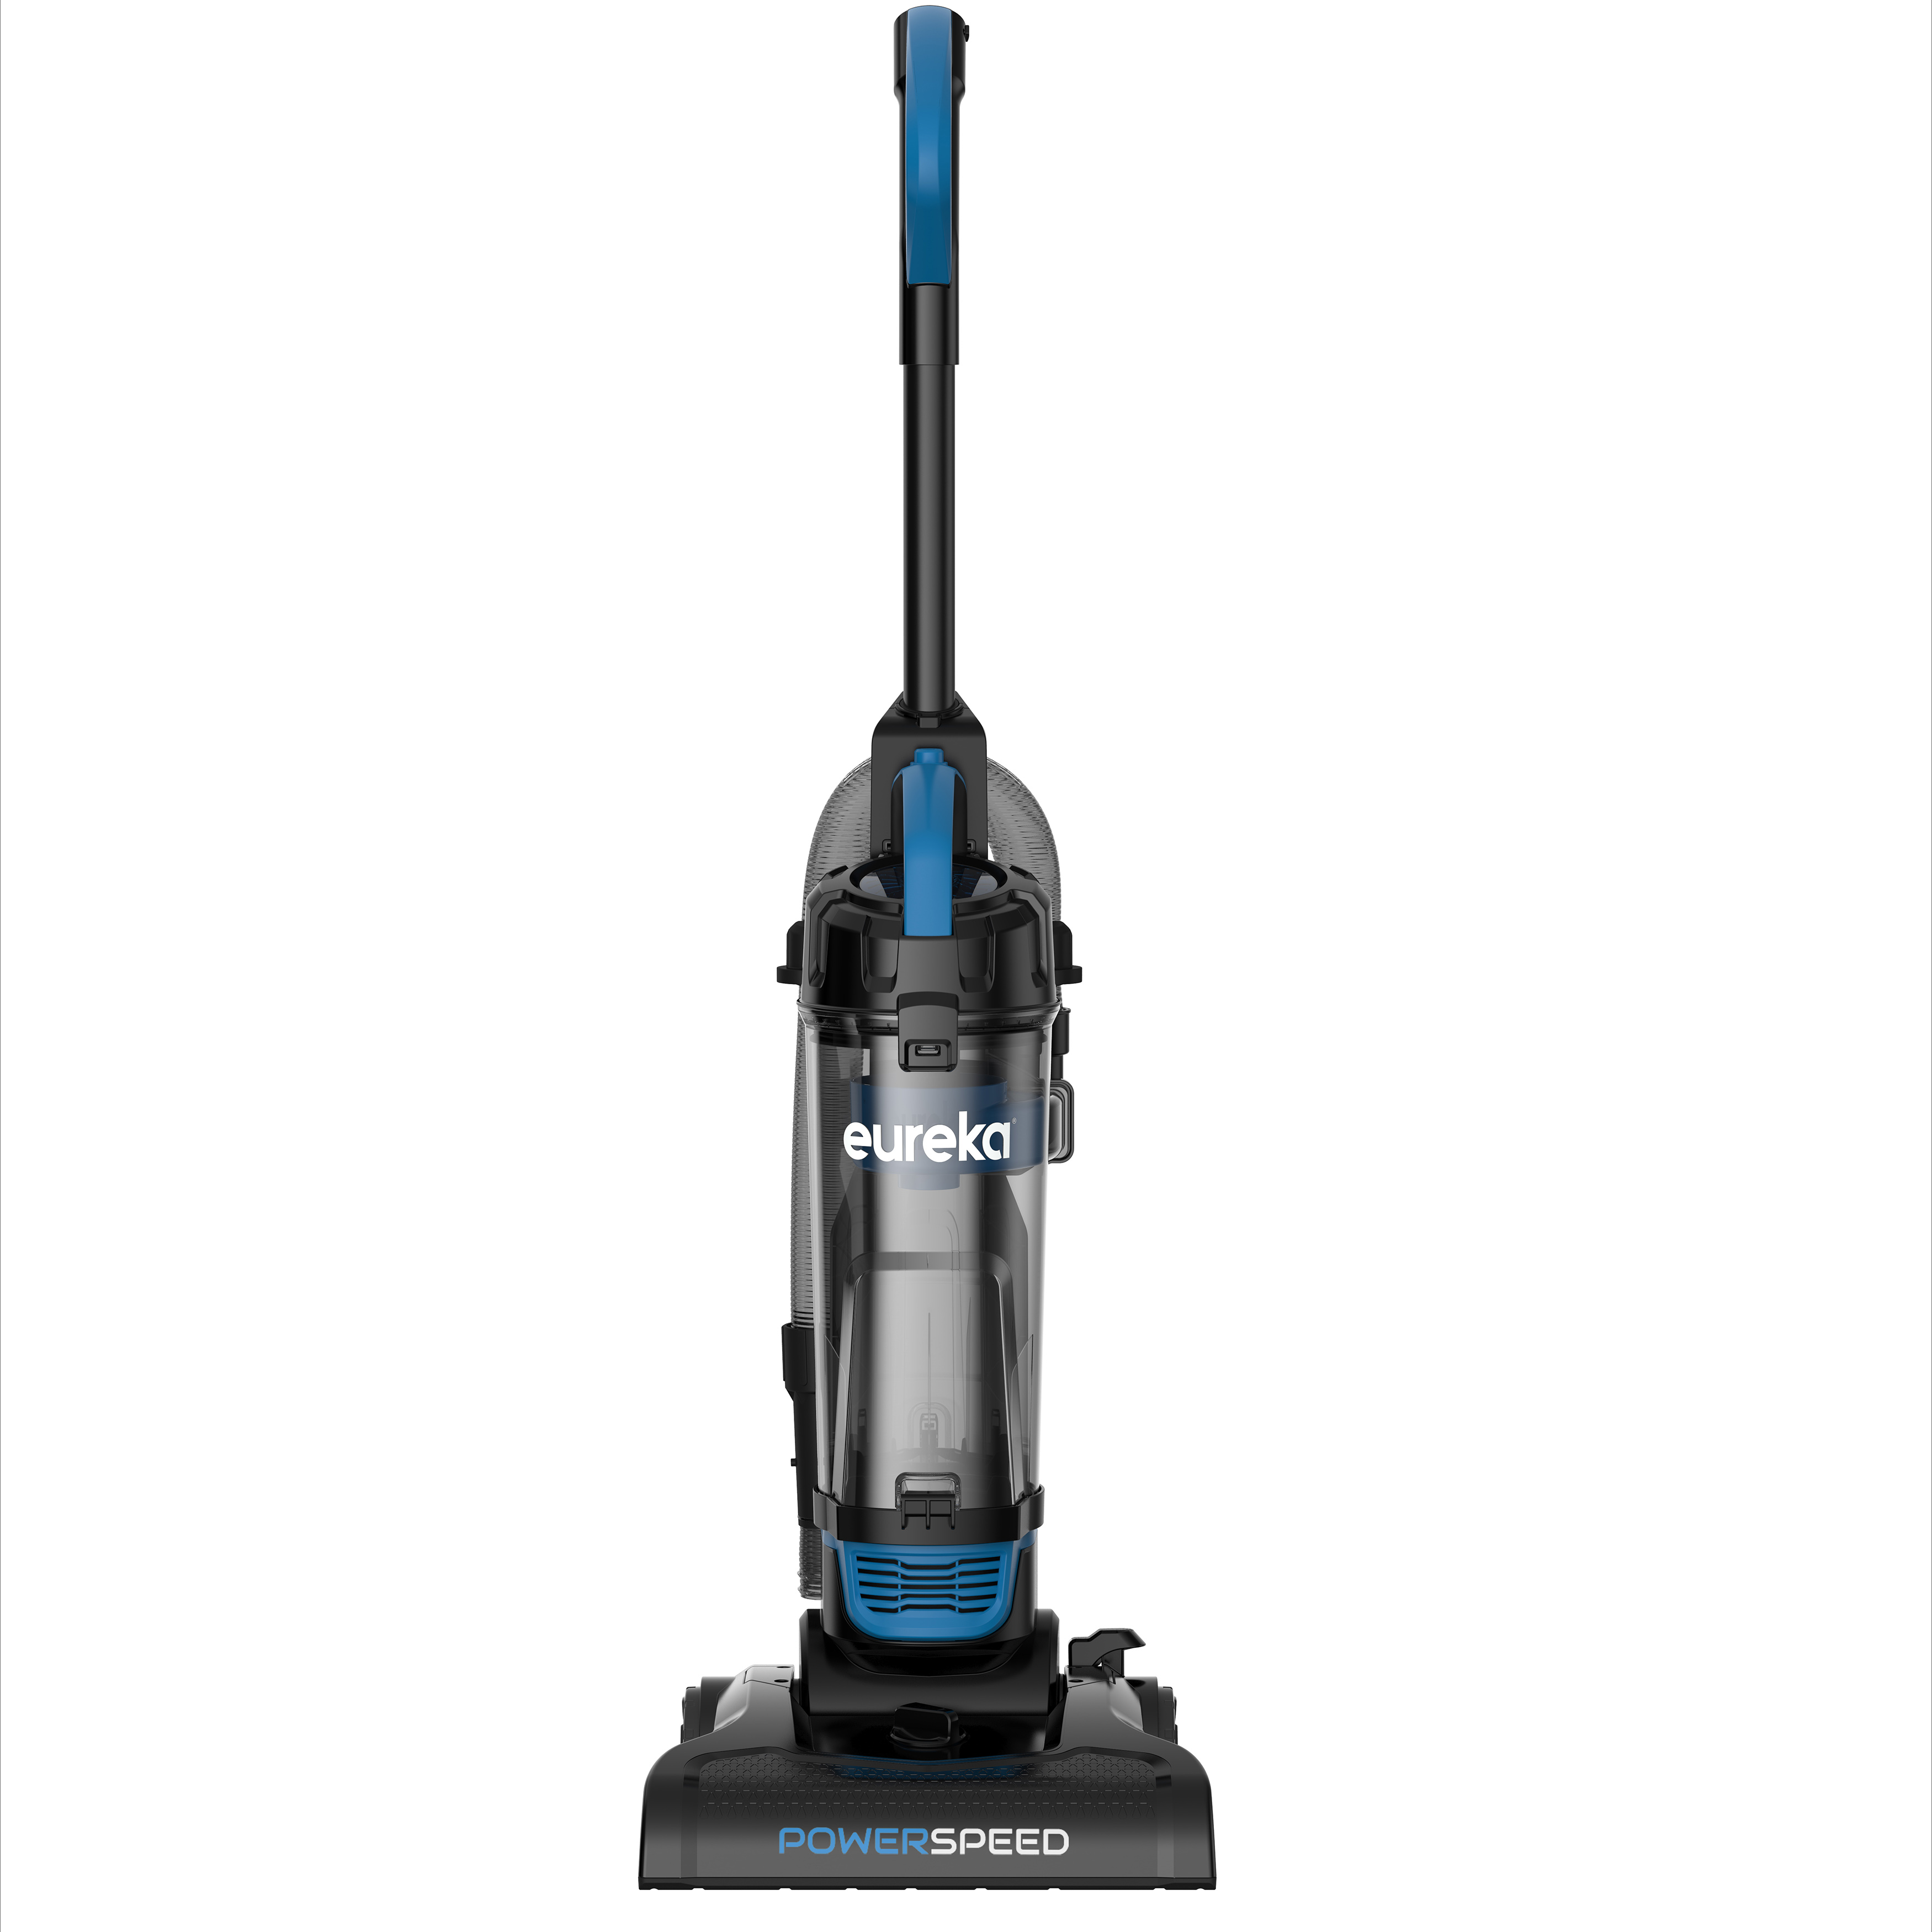 Eureka PowerSpeed Multi-Surface Upright Vacuum Cleaner with 5-Height Adjustments & XL Dust Cup, NEU185 - image 1 of 3